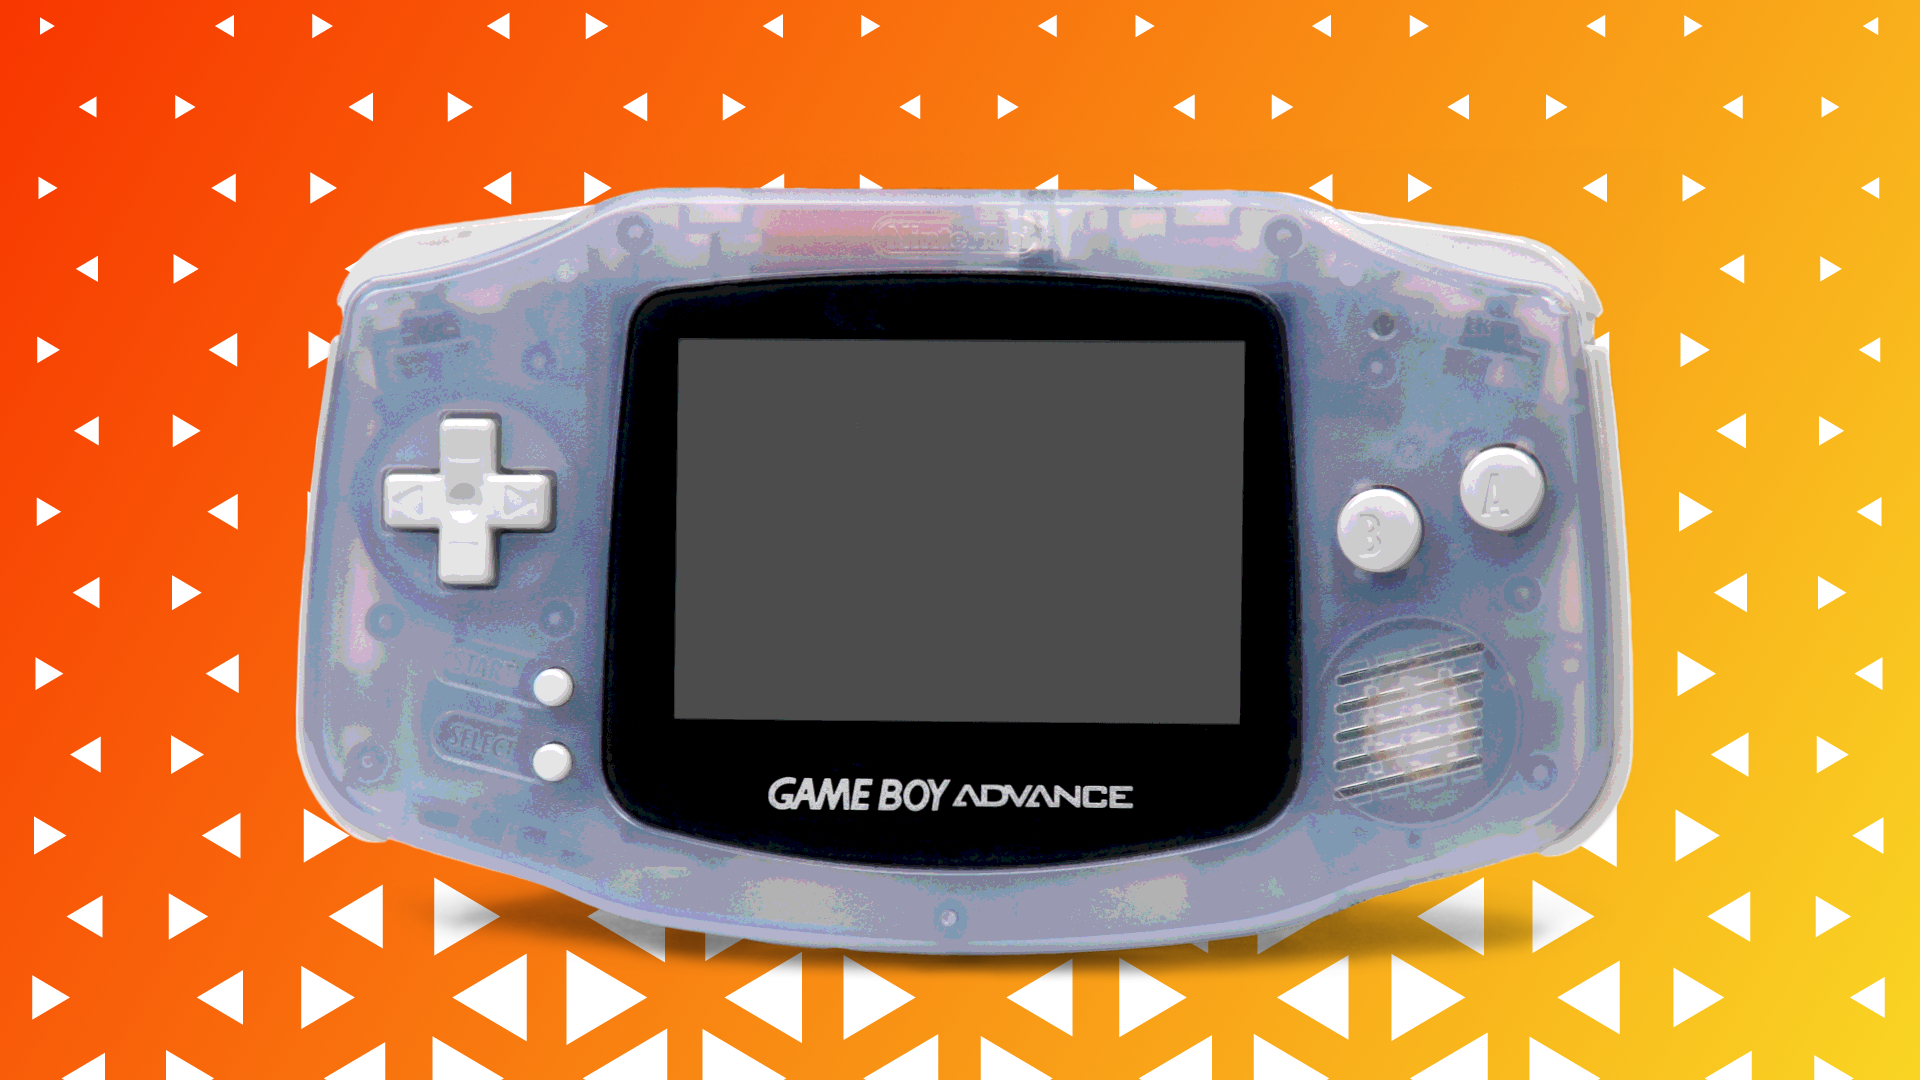 The 25 best GBA games of all time